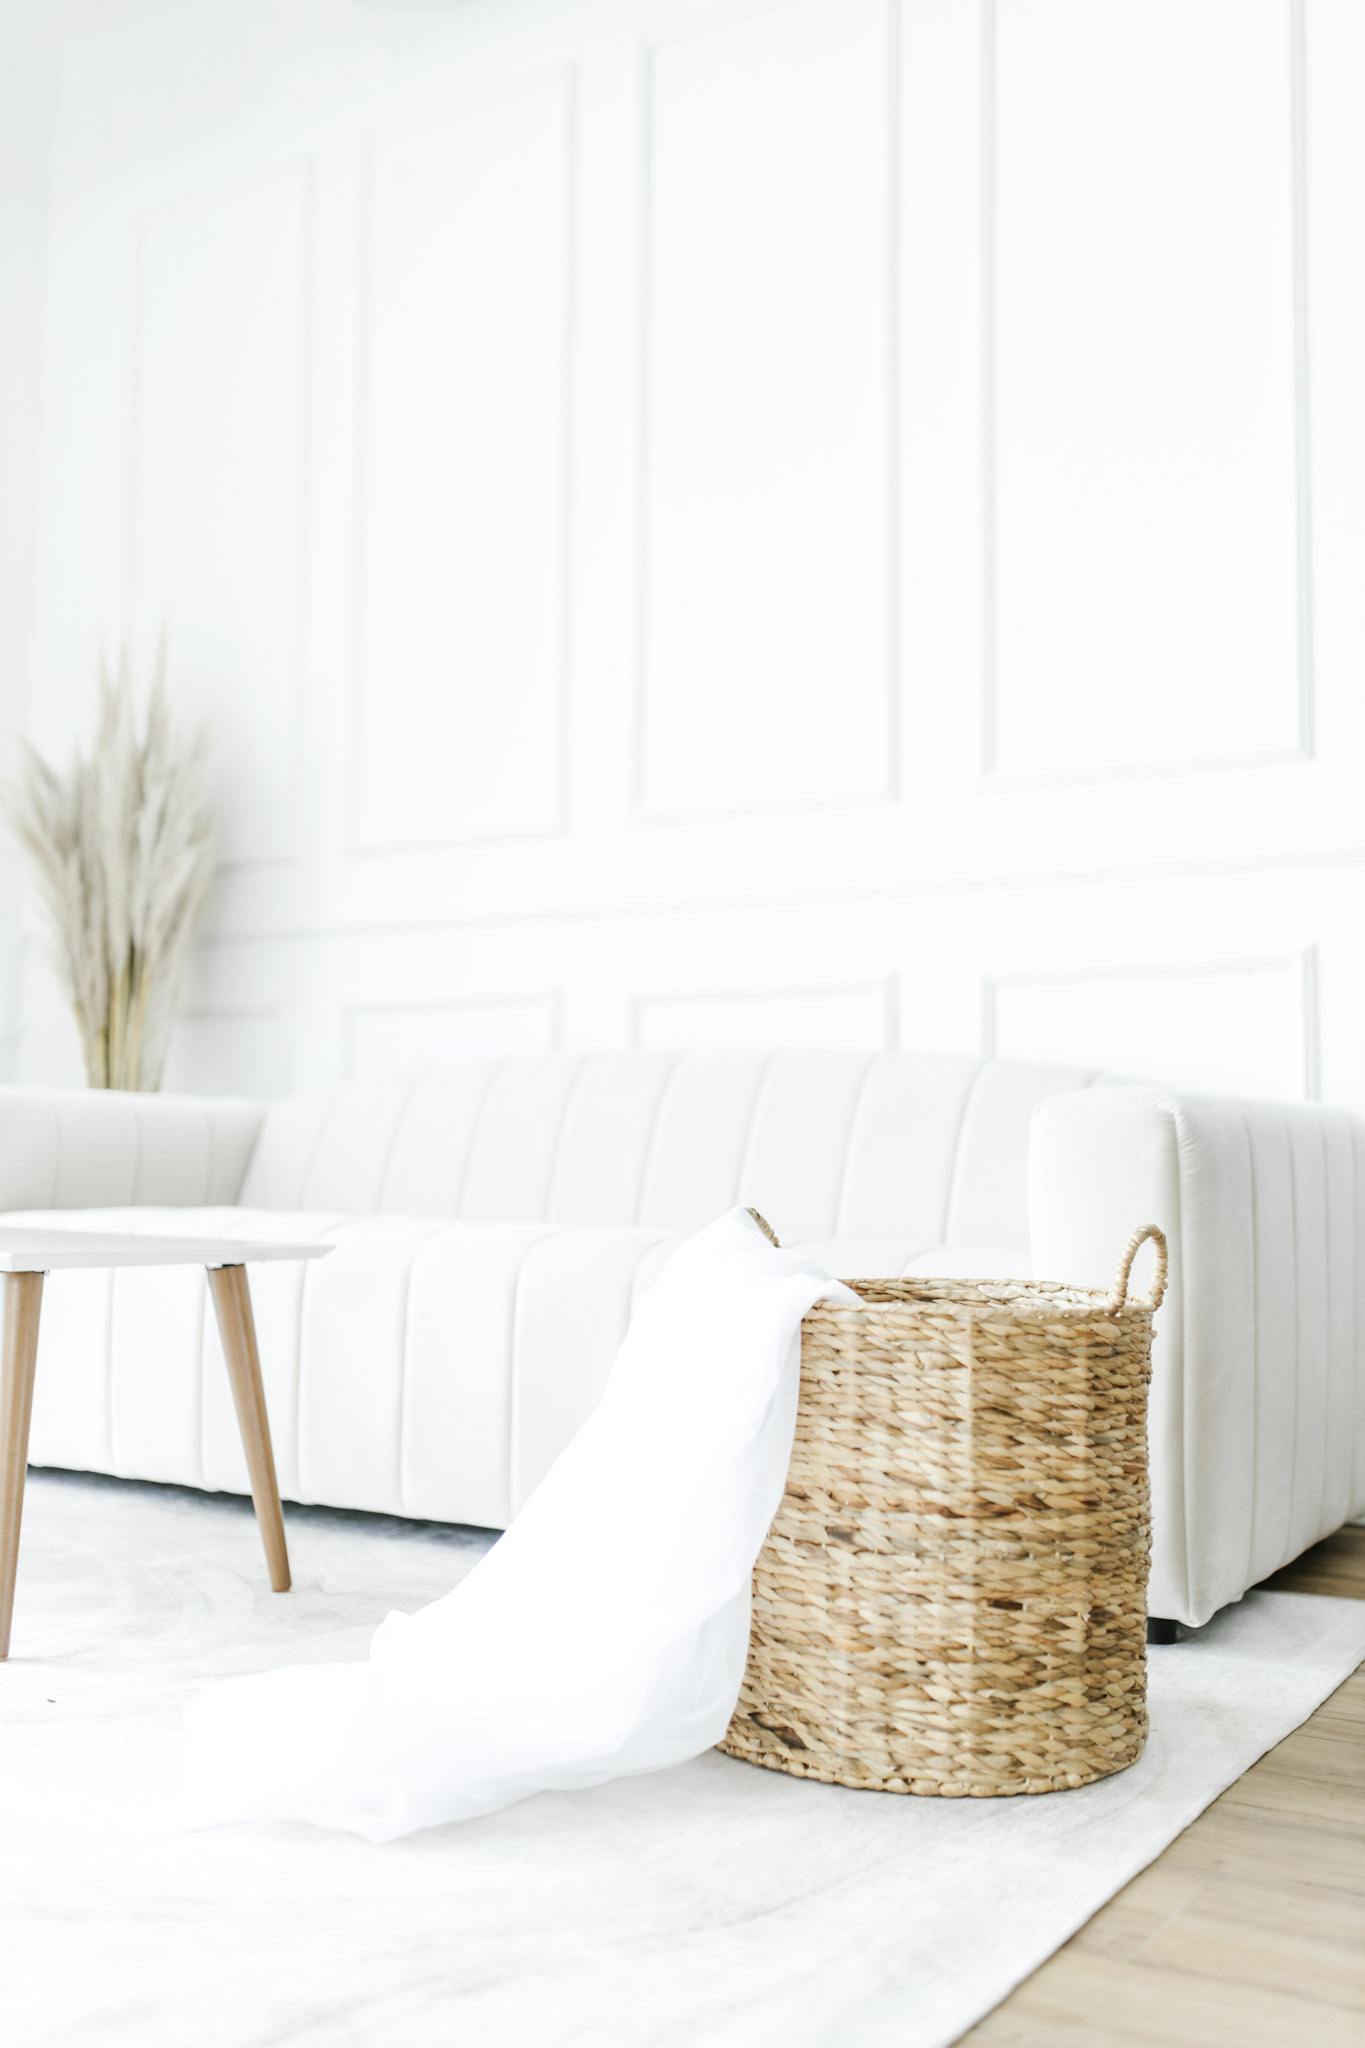 White, neutral, furniture is shown in a bright living room. This article covers creating the ideal relaxed living space with casual furniture.